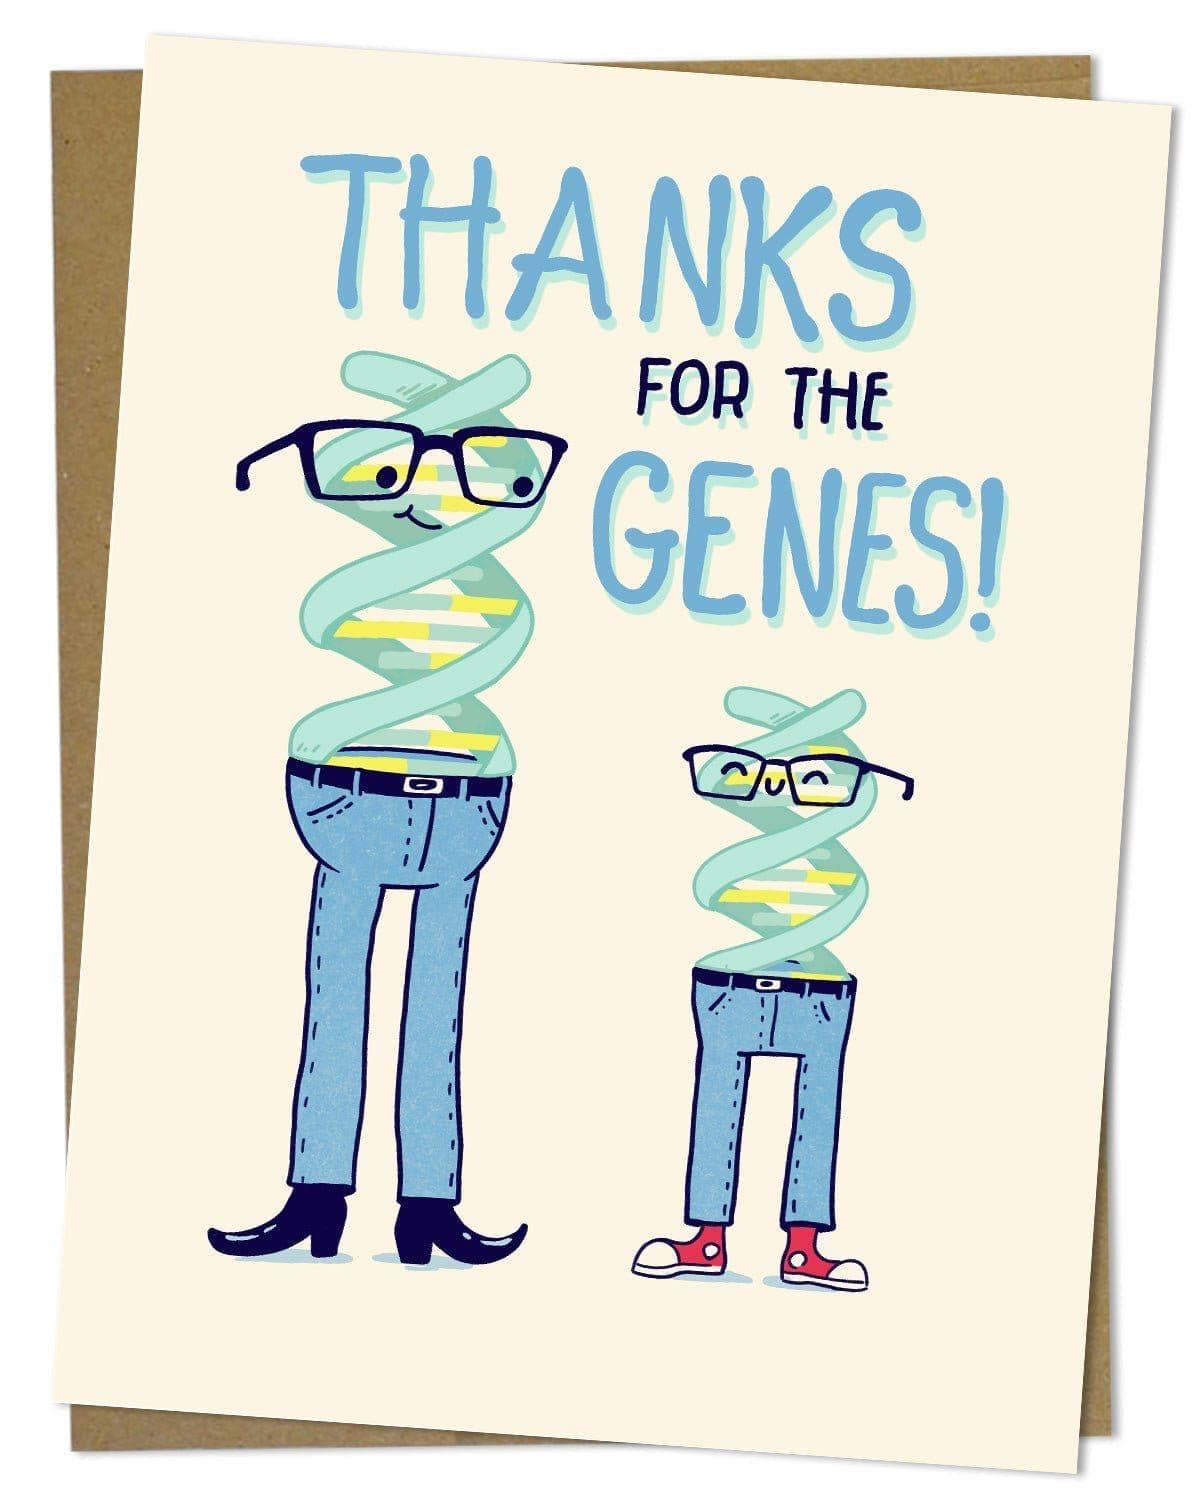 Thanks-for-the-Genes-Card-Cognitive-Surplus-709.jpg